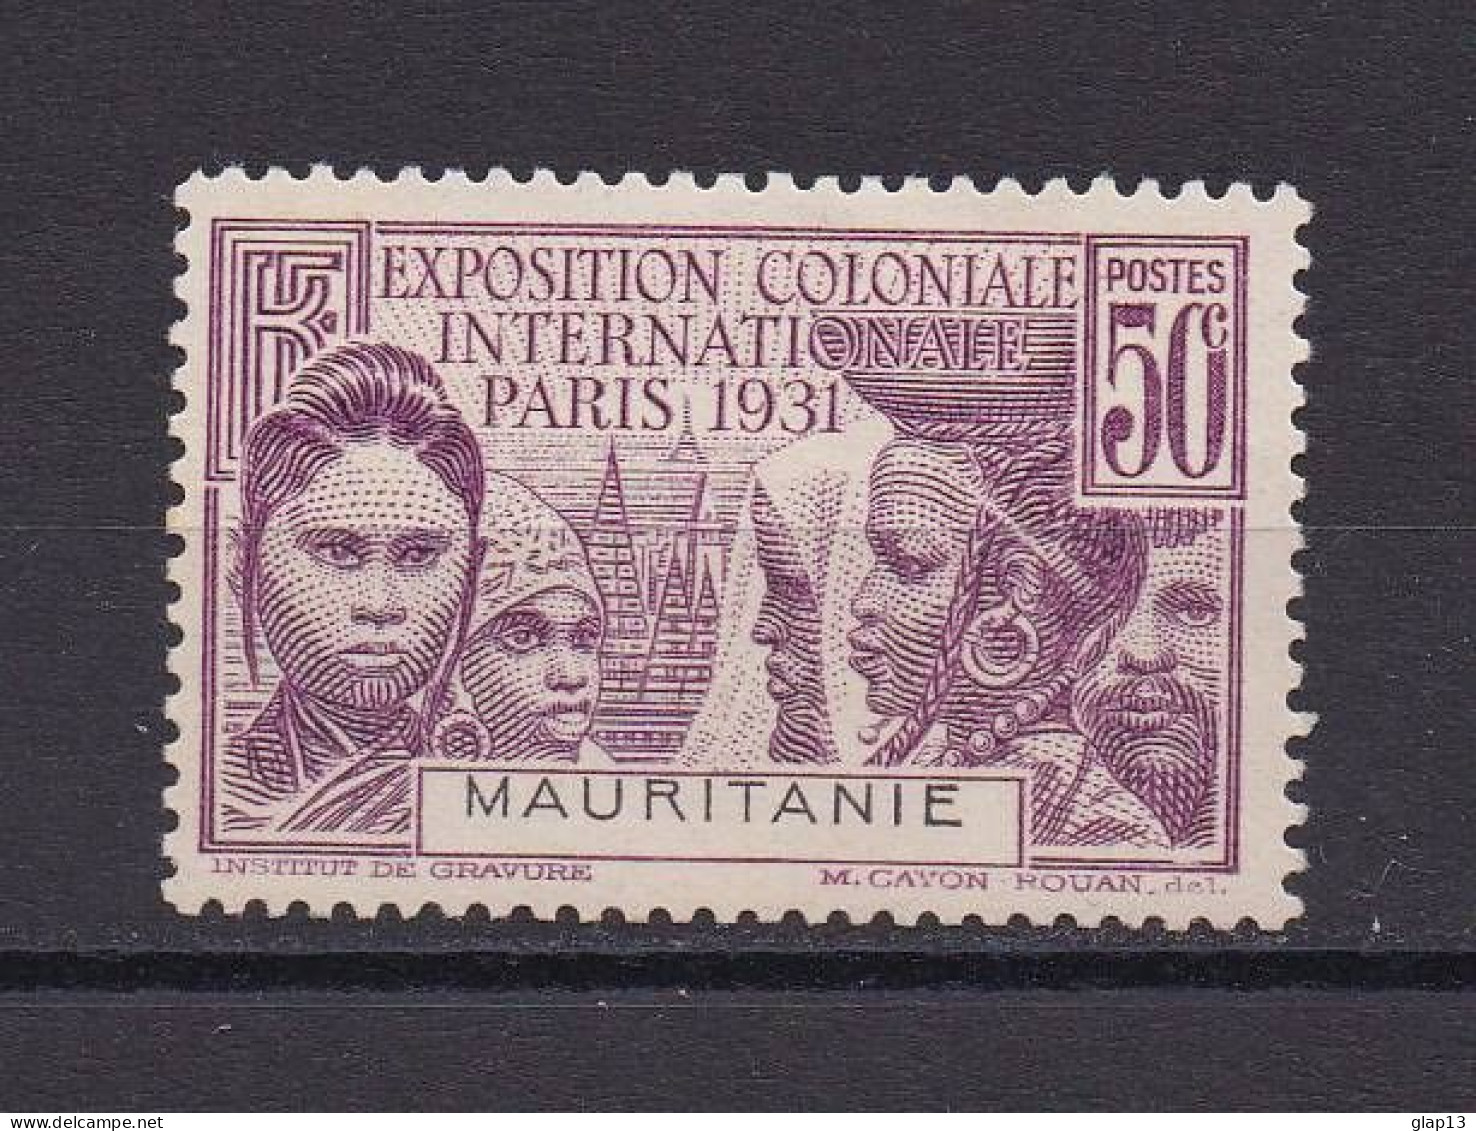 MAURITANIE 1931 TIMBRE N°63 NEUF AVEC CHARNIERE EXPOSITION - Nuovi